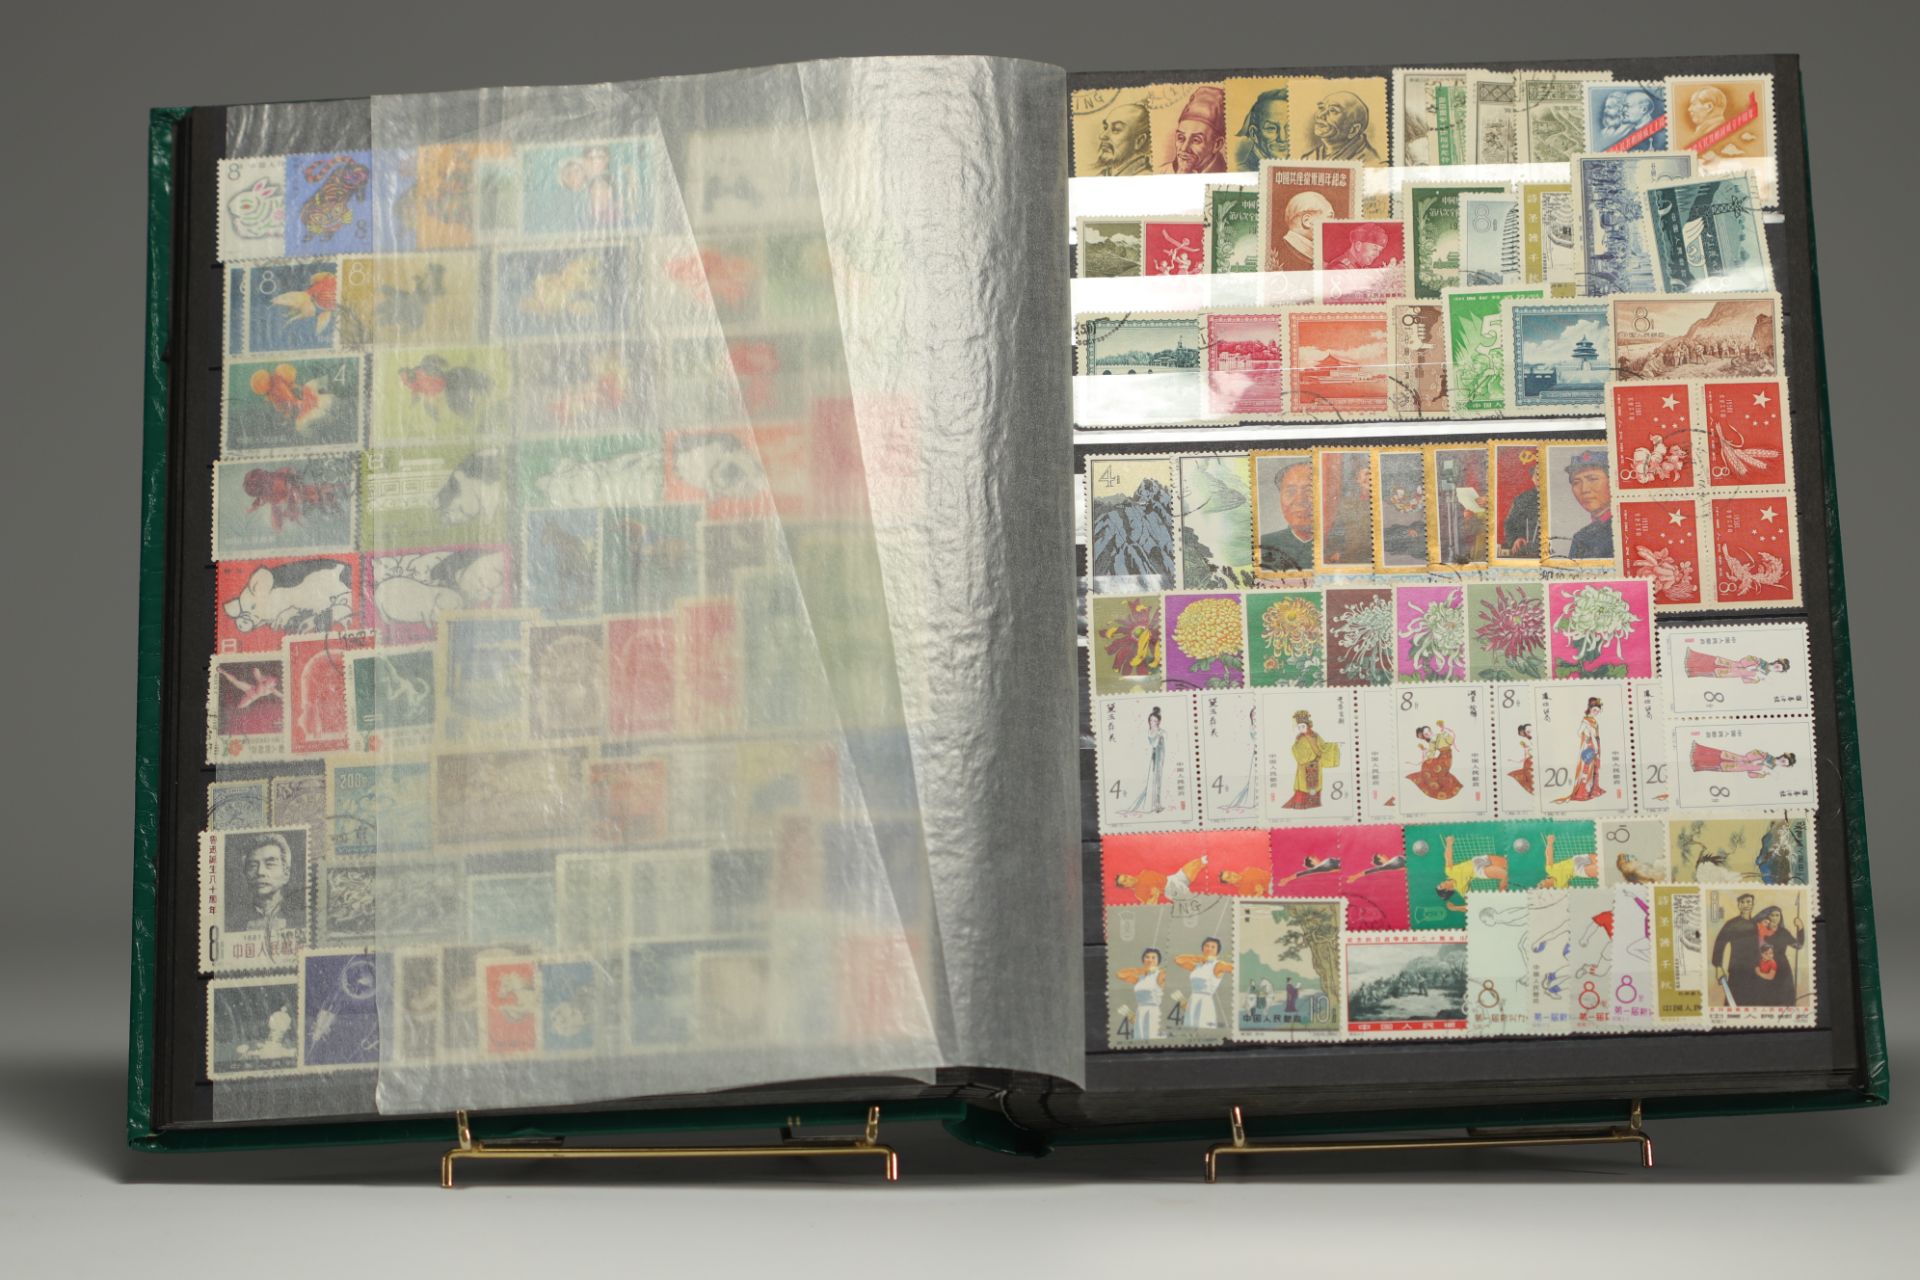 Set of 21 albums of world stamps, China, Japan, Middle East, Europe, etc. (Batch 1) - Image 12 of 14